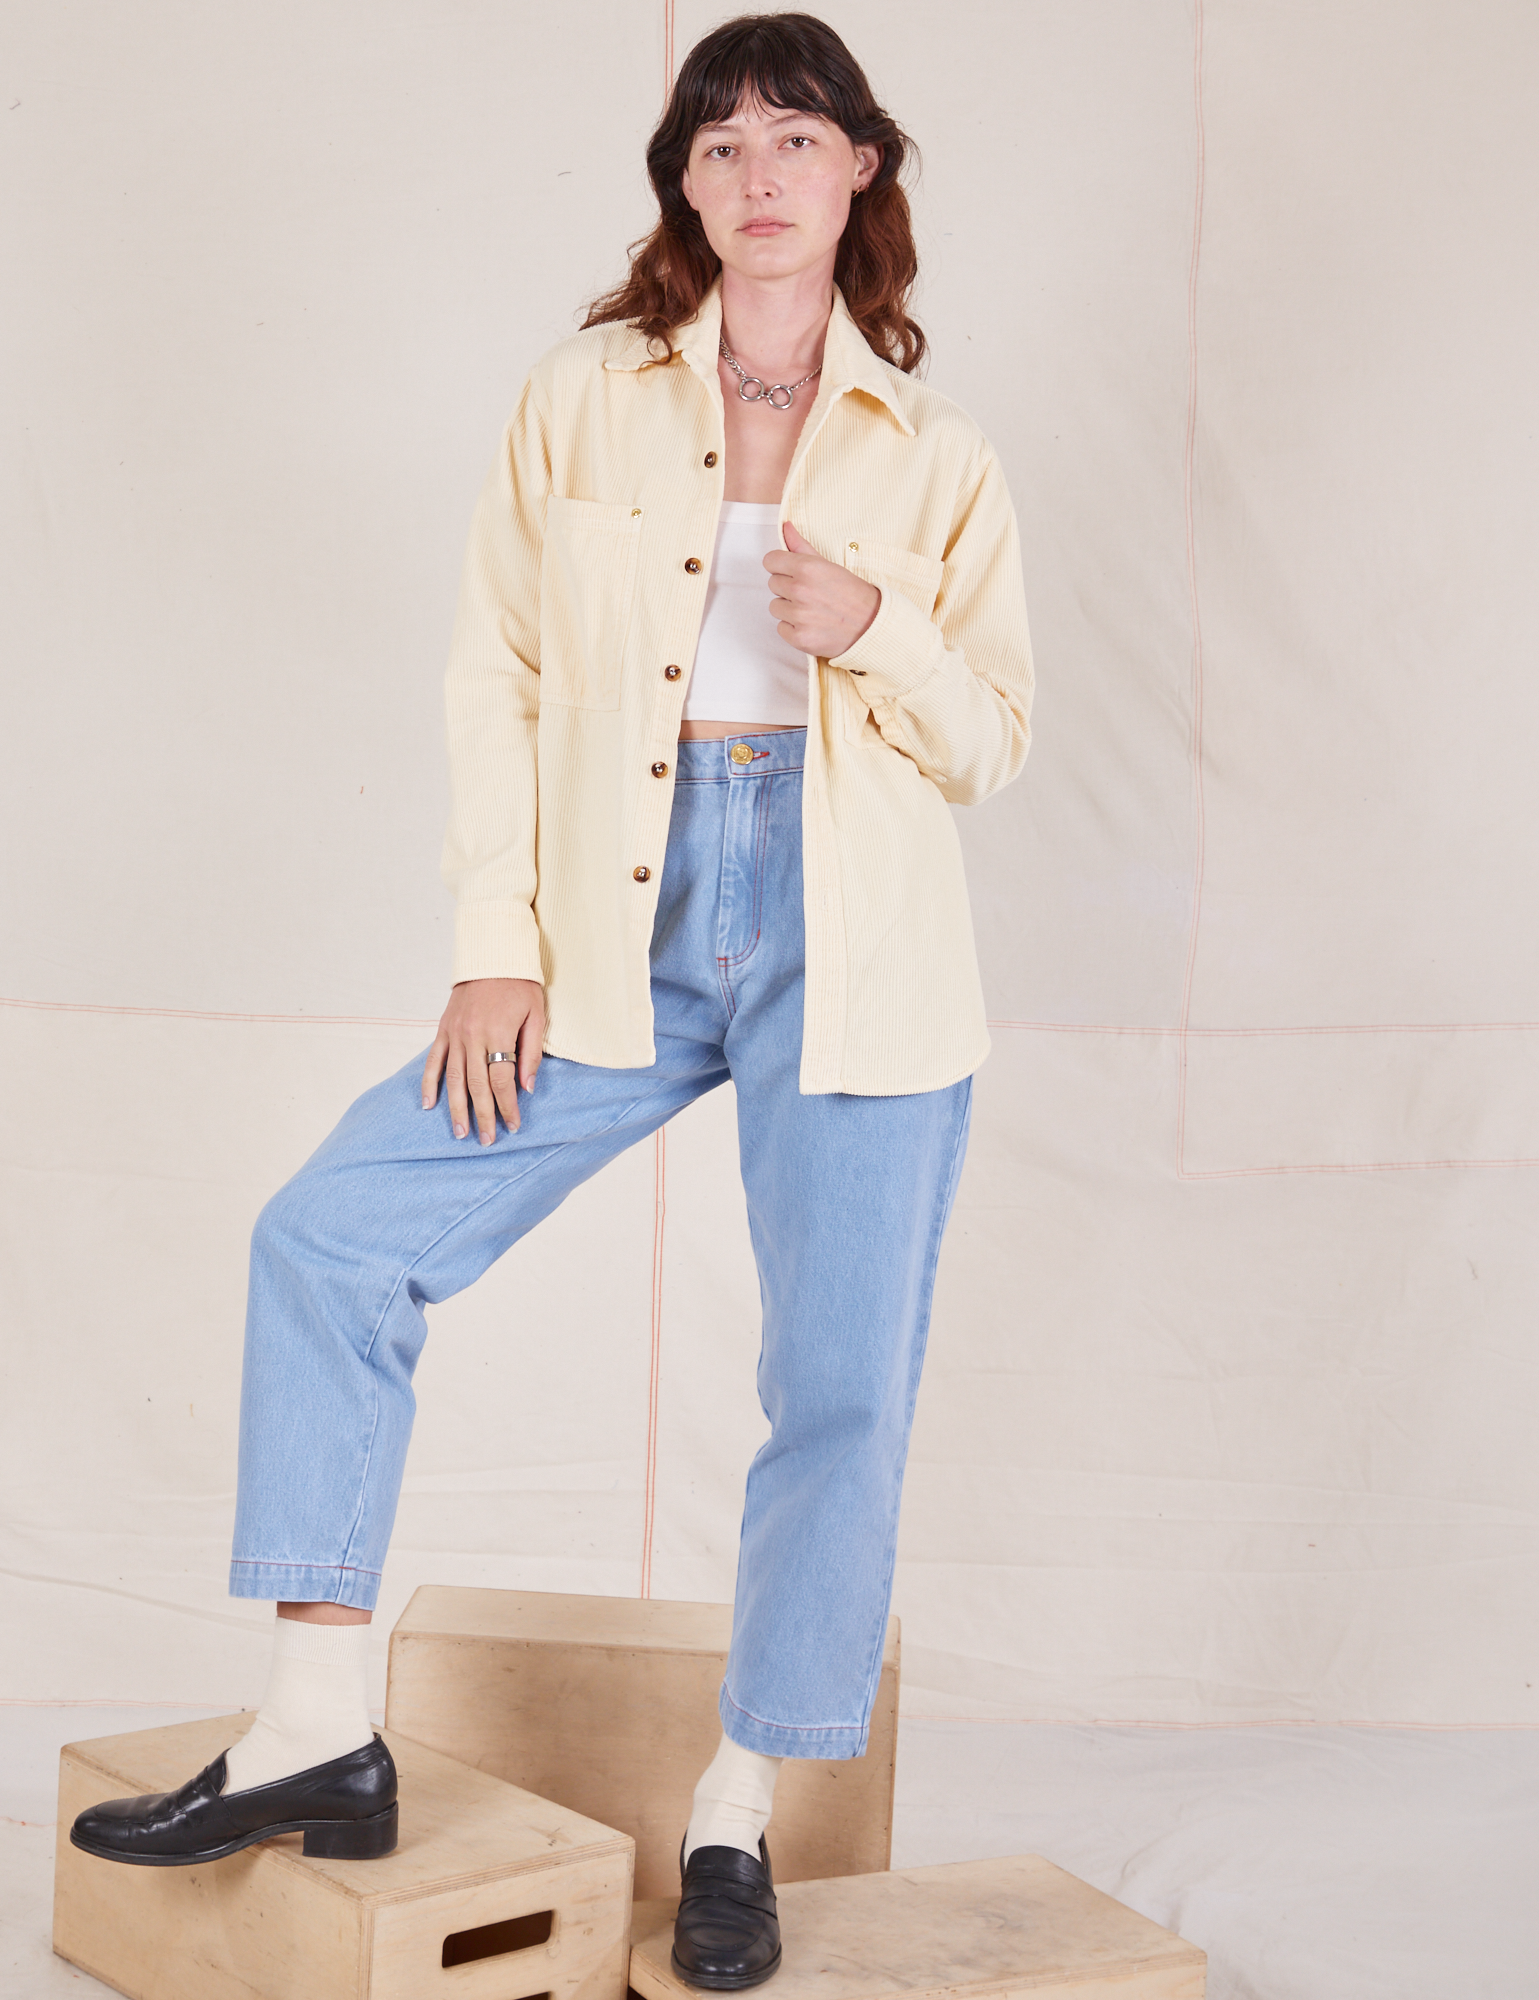 Alex is wearing Corduroy Overshirt in Vintage Off-White with a vintage off-white Cropped Cami underneath and light wash Denim Trouser Jeans